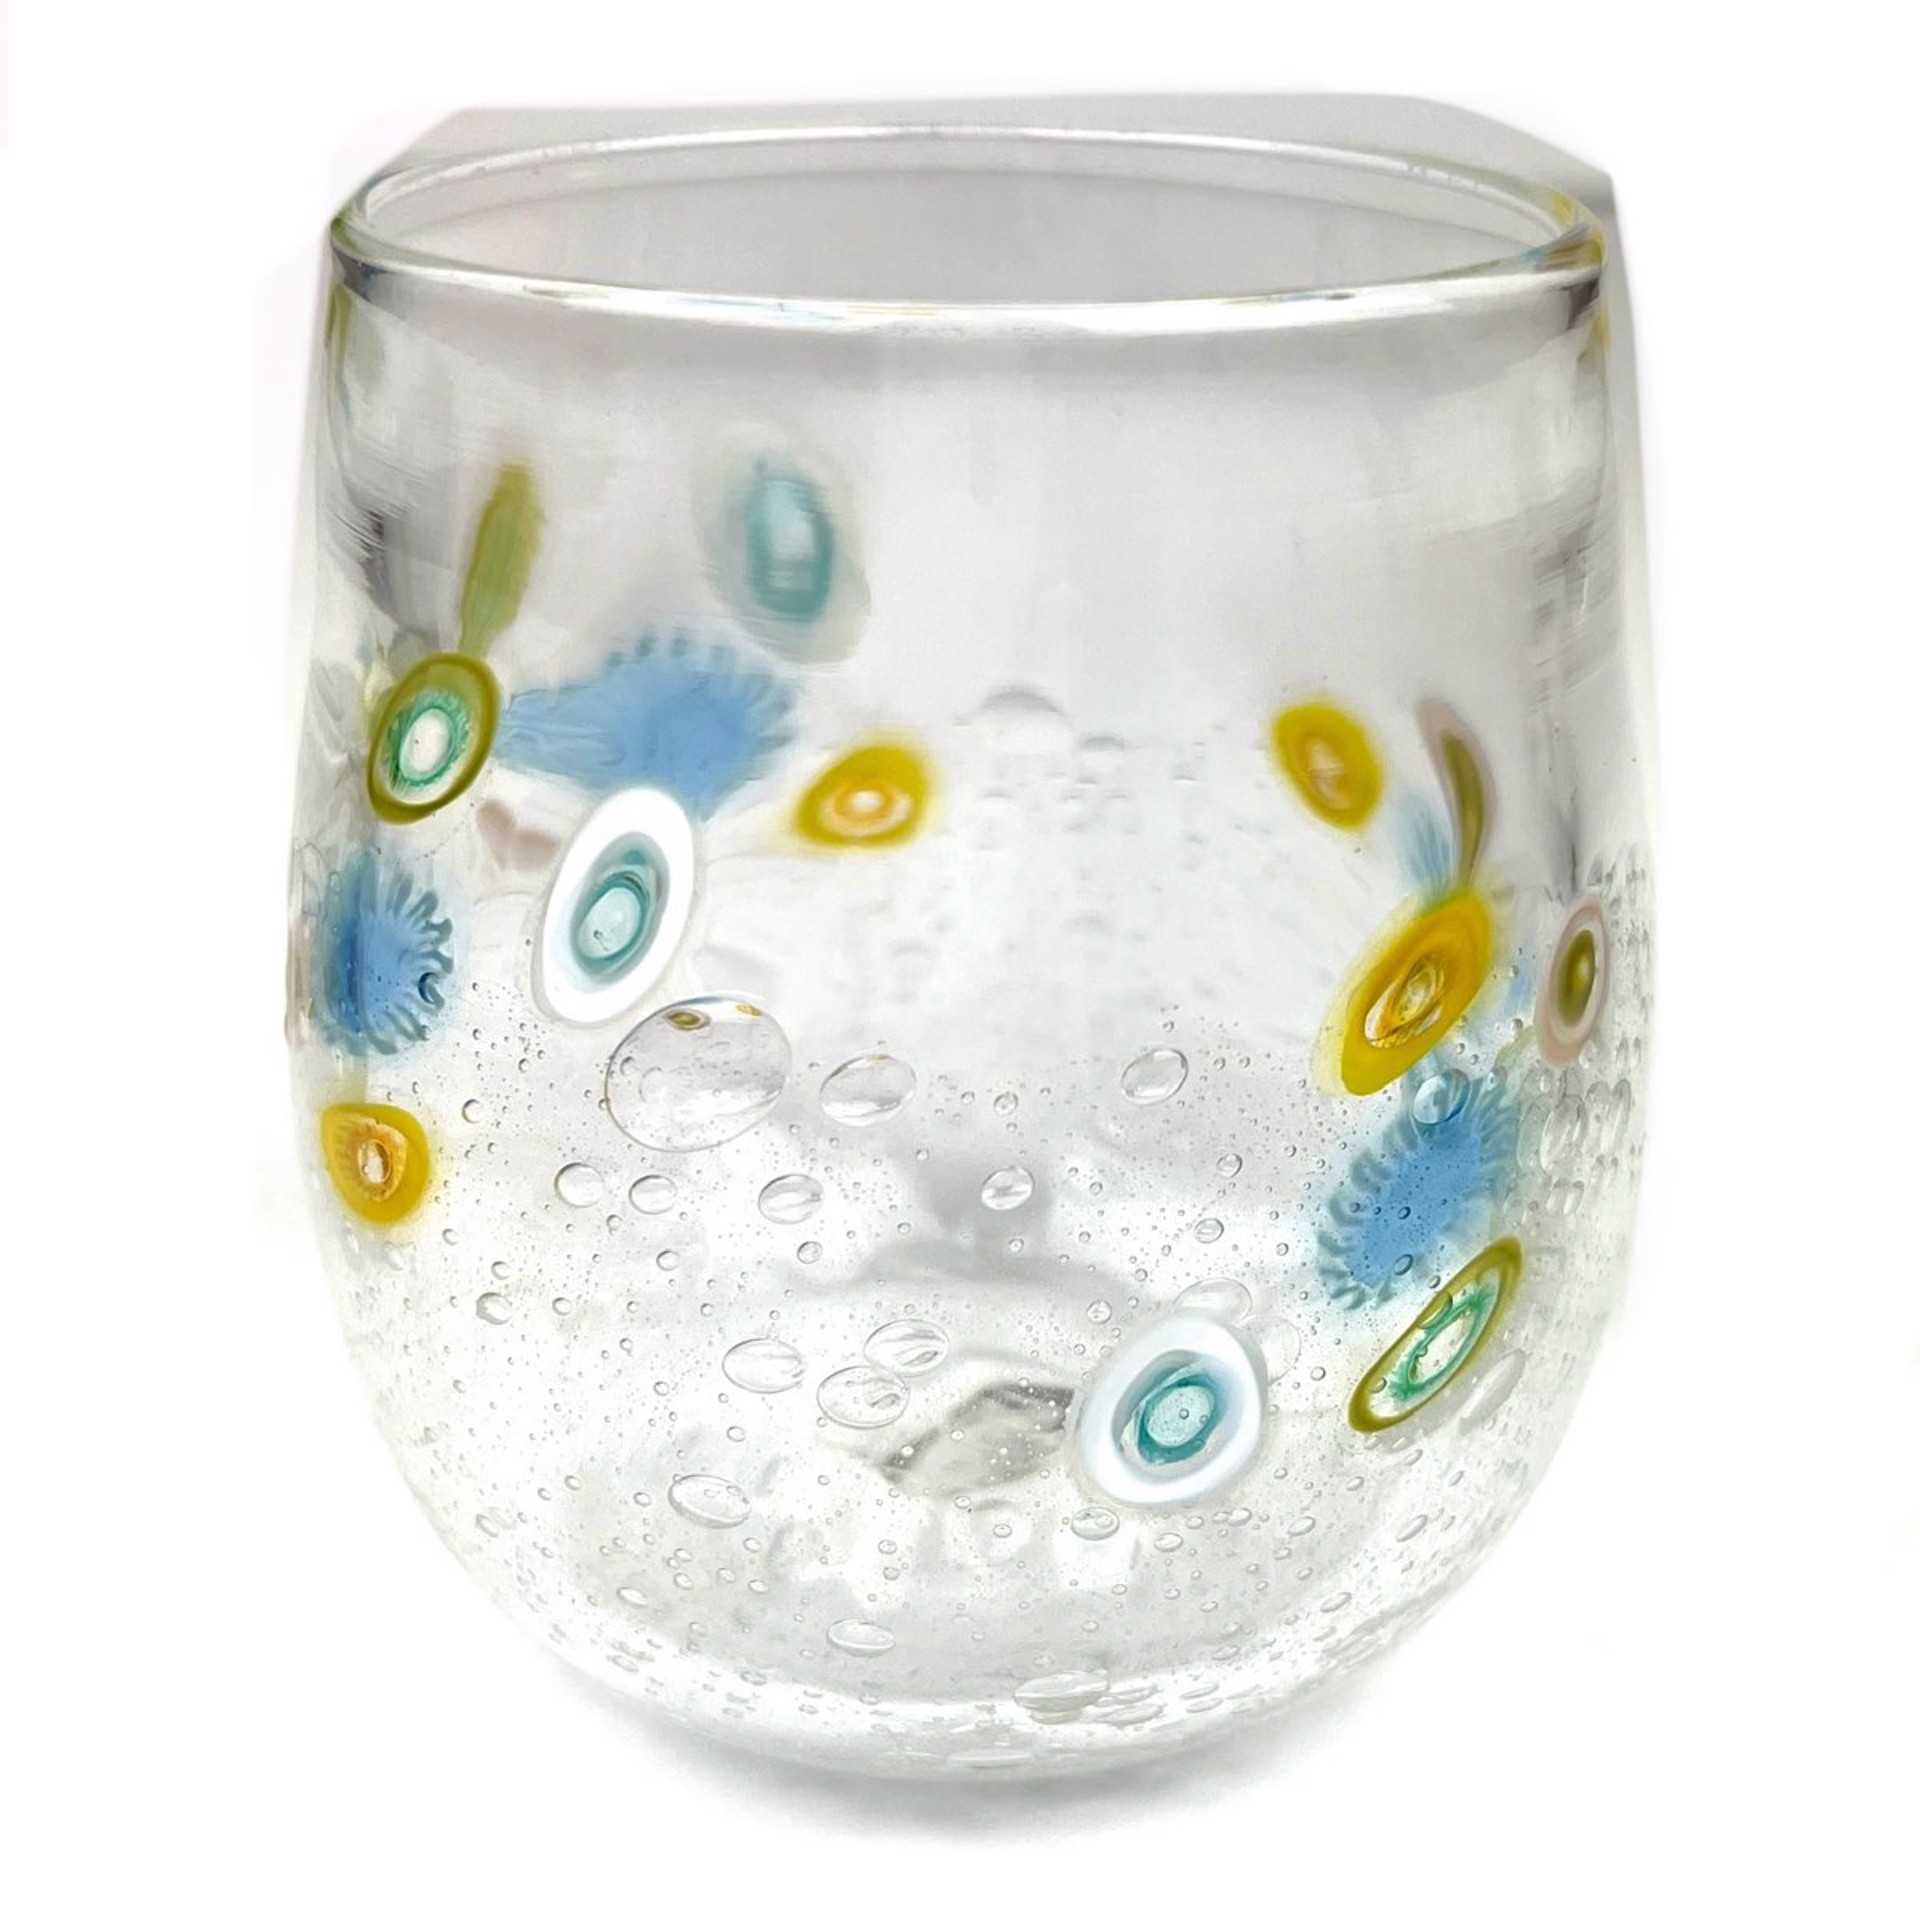 Millefiori Stemless Wine Glass by Chad Balster